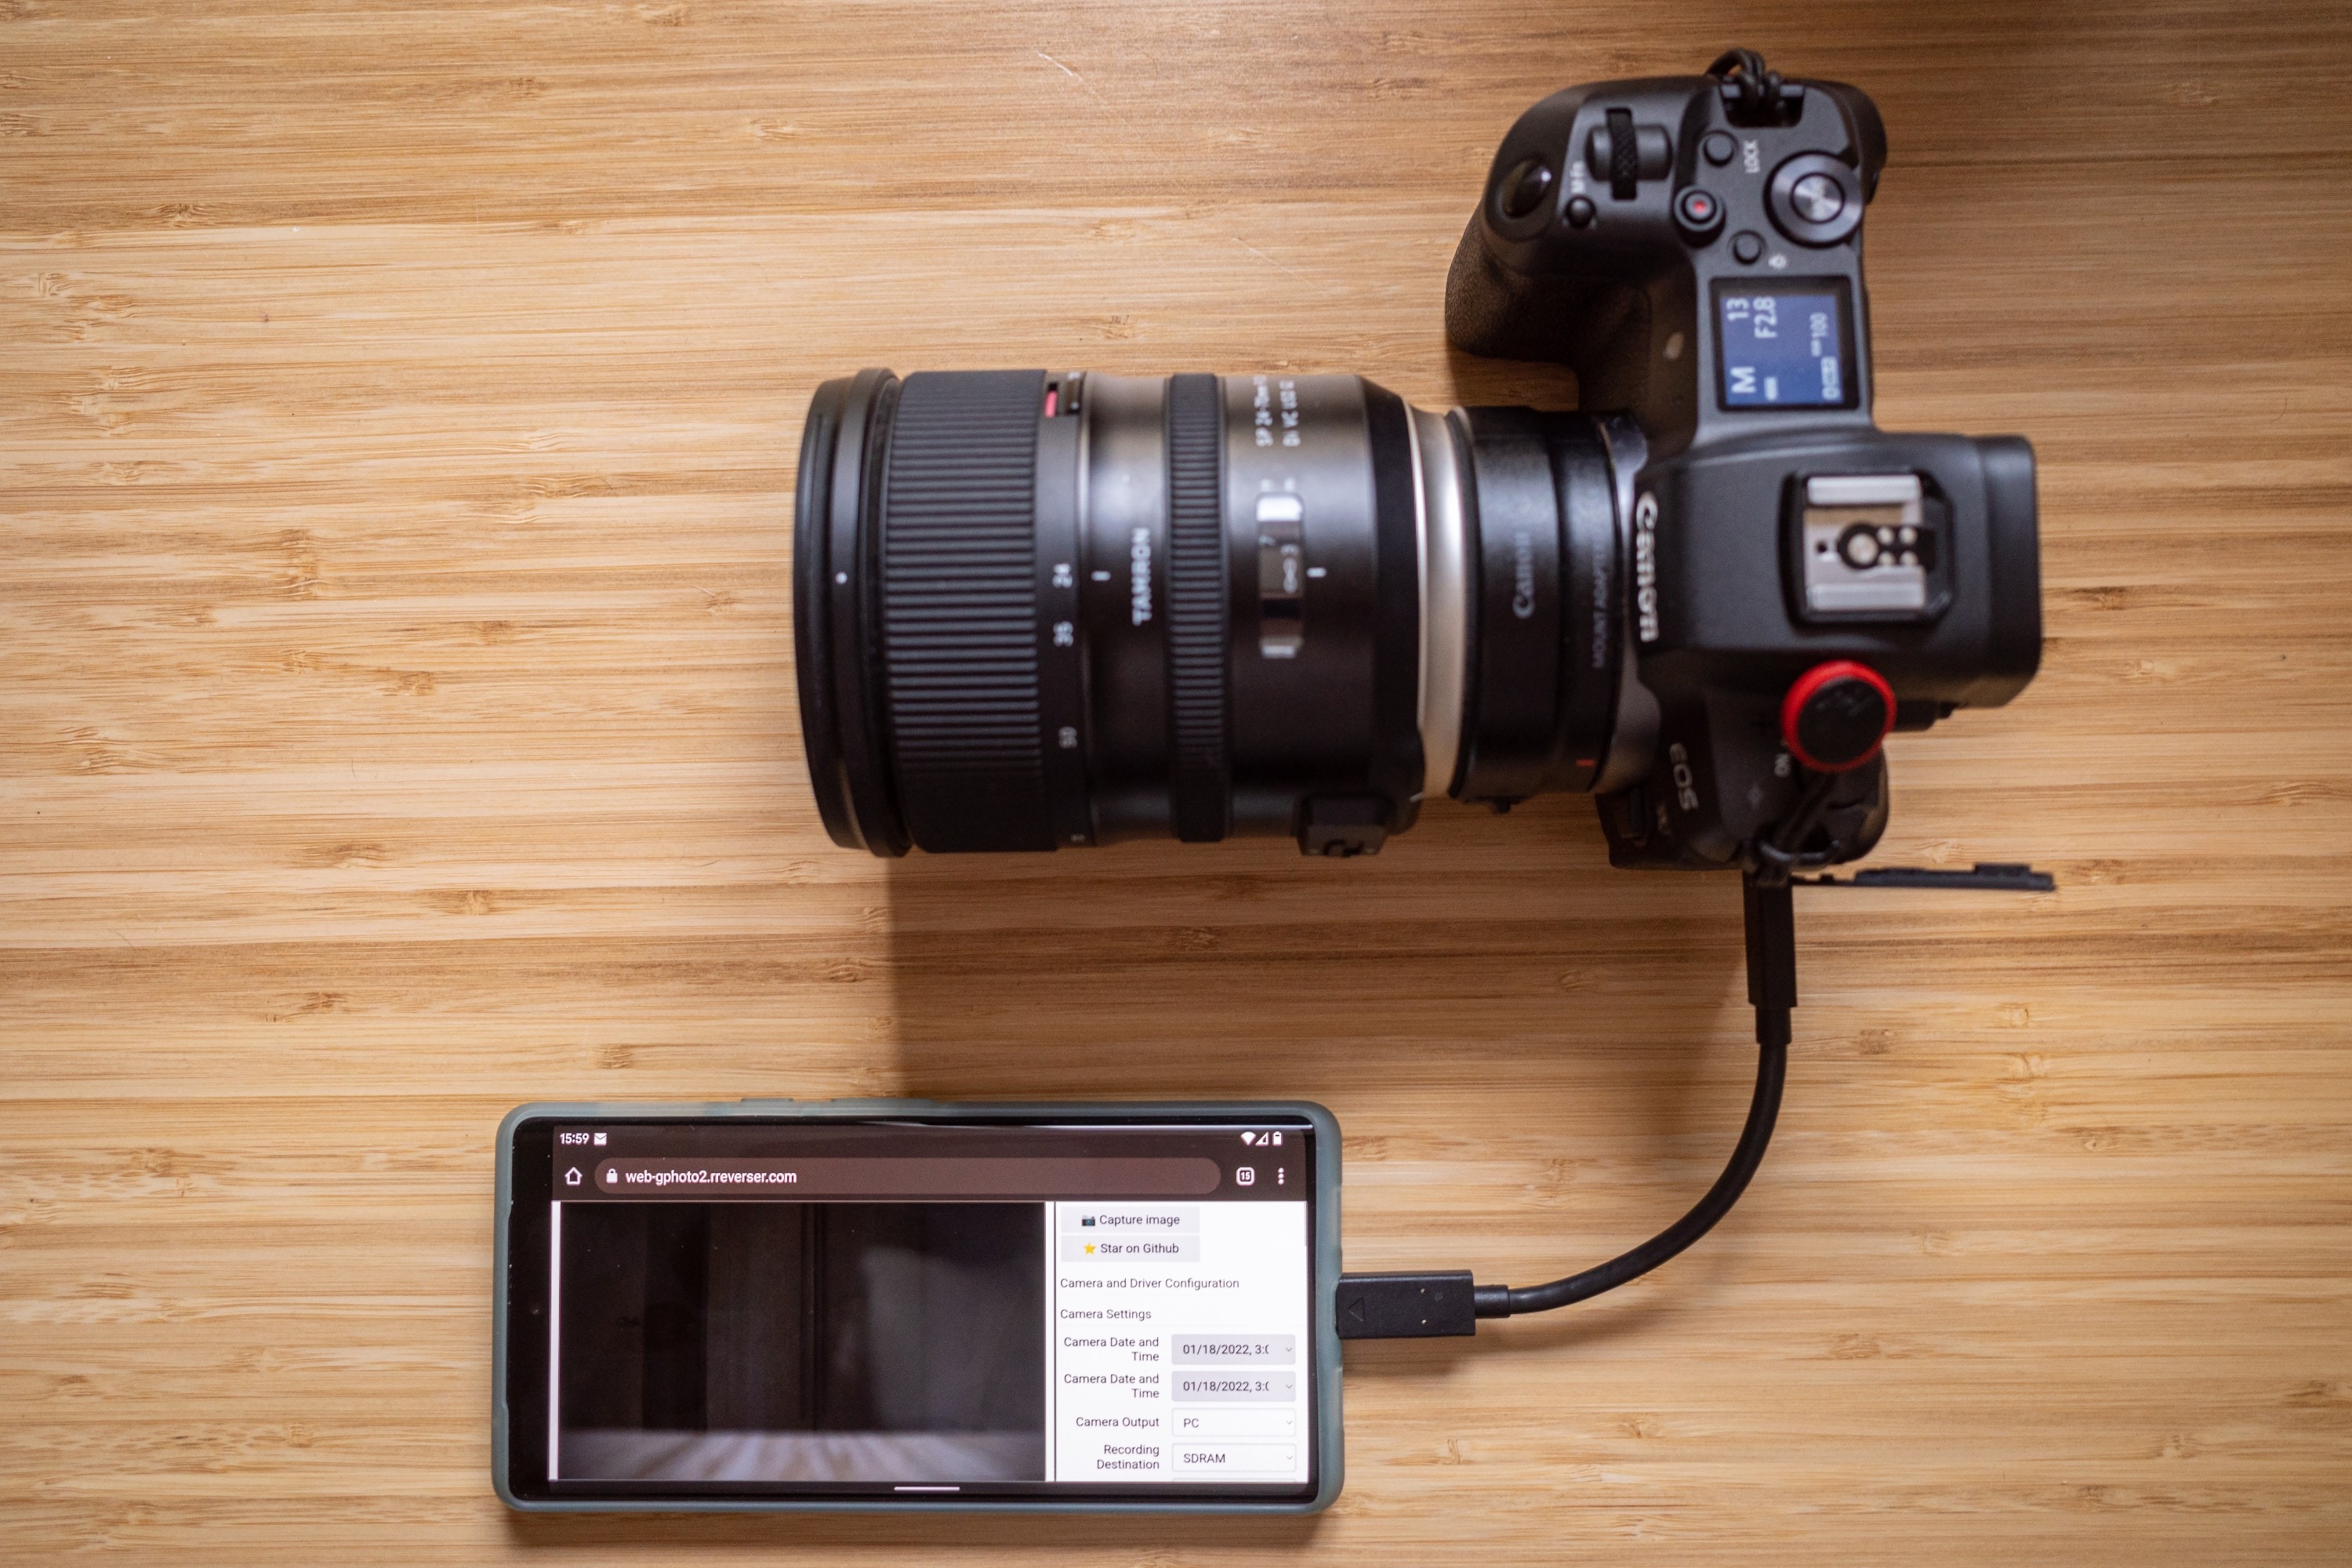 Android phone connected to a Canon camera via a USB-C cable.